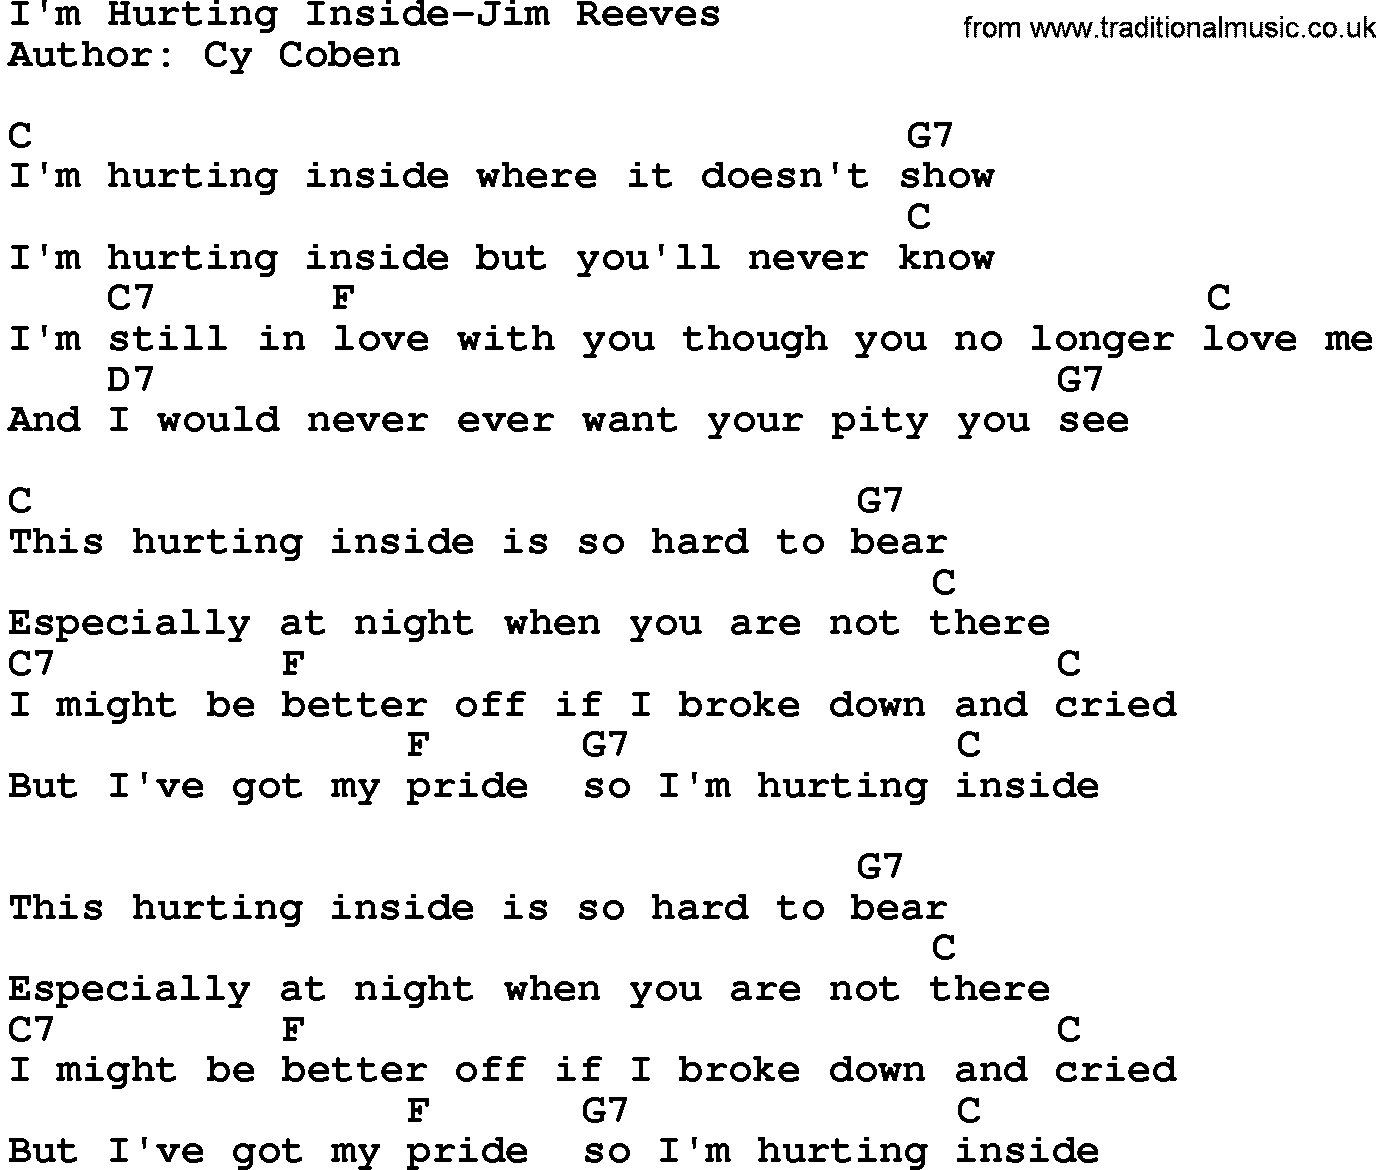 Country music song: I'm Hurting Inside-Jim Reeves lyrics and chords